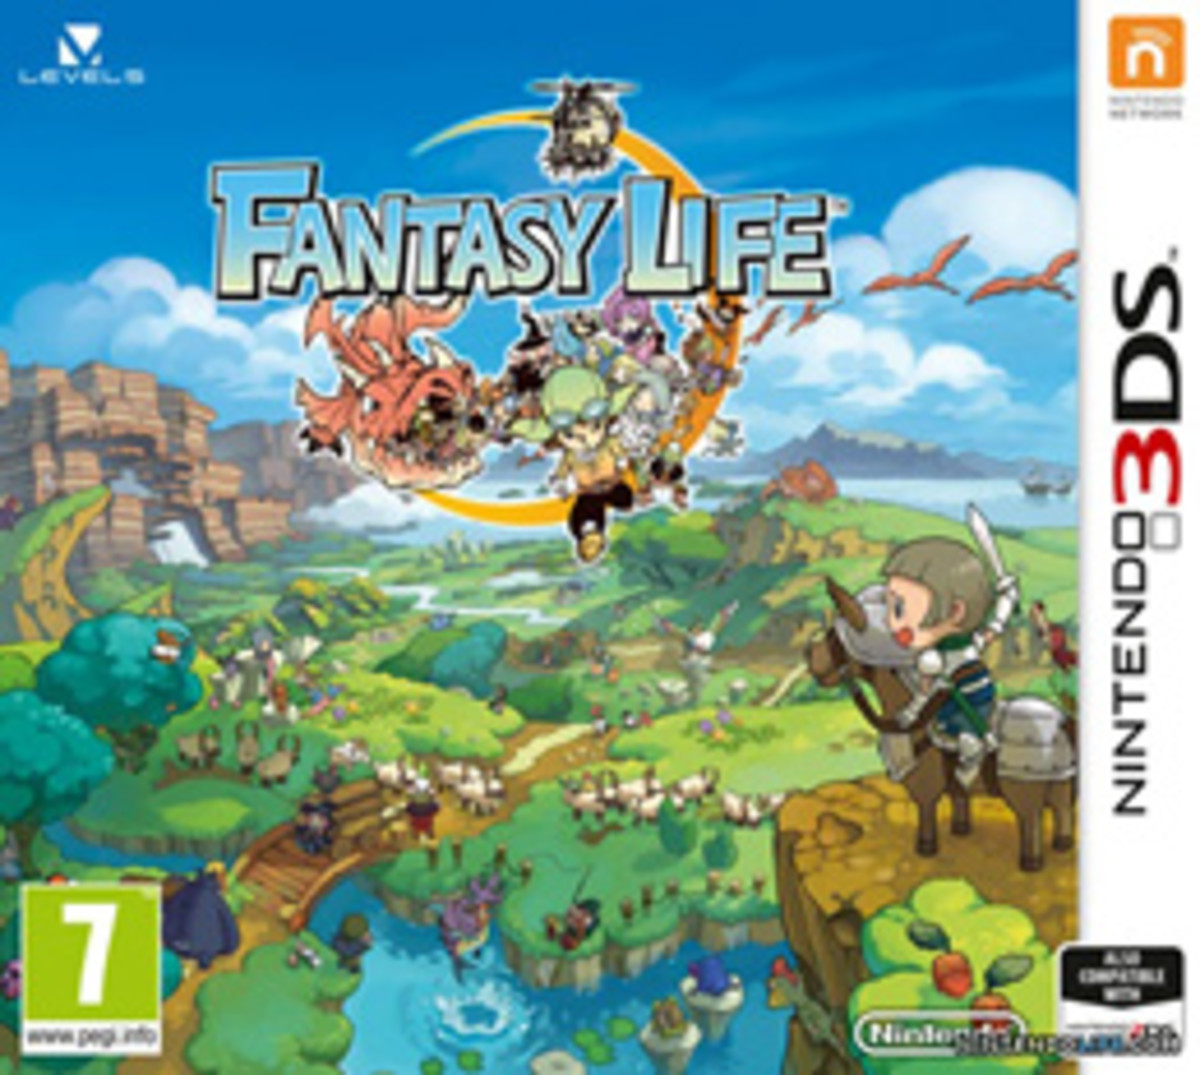 fantasy-life-3ds-by-level-5